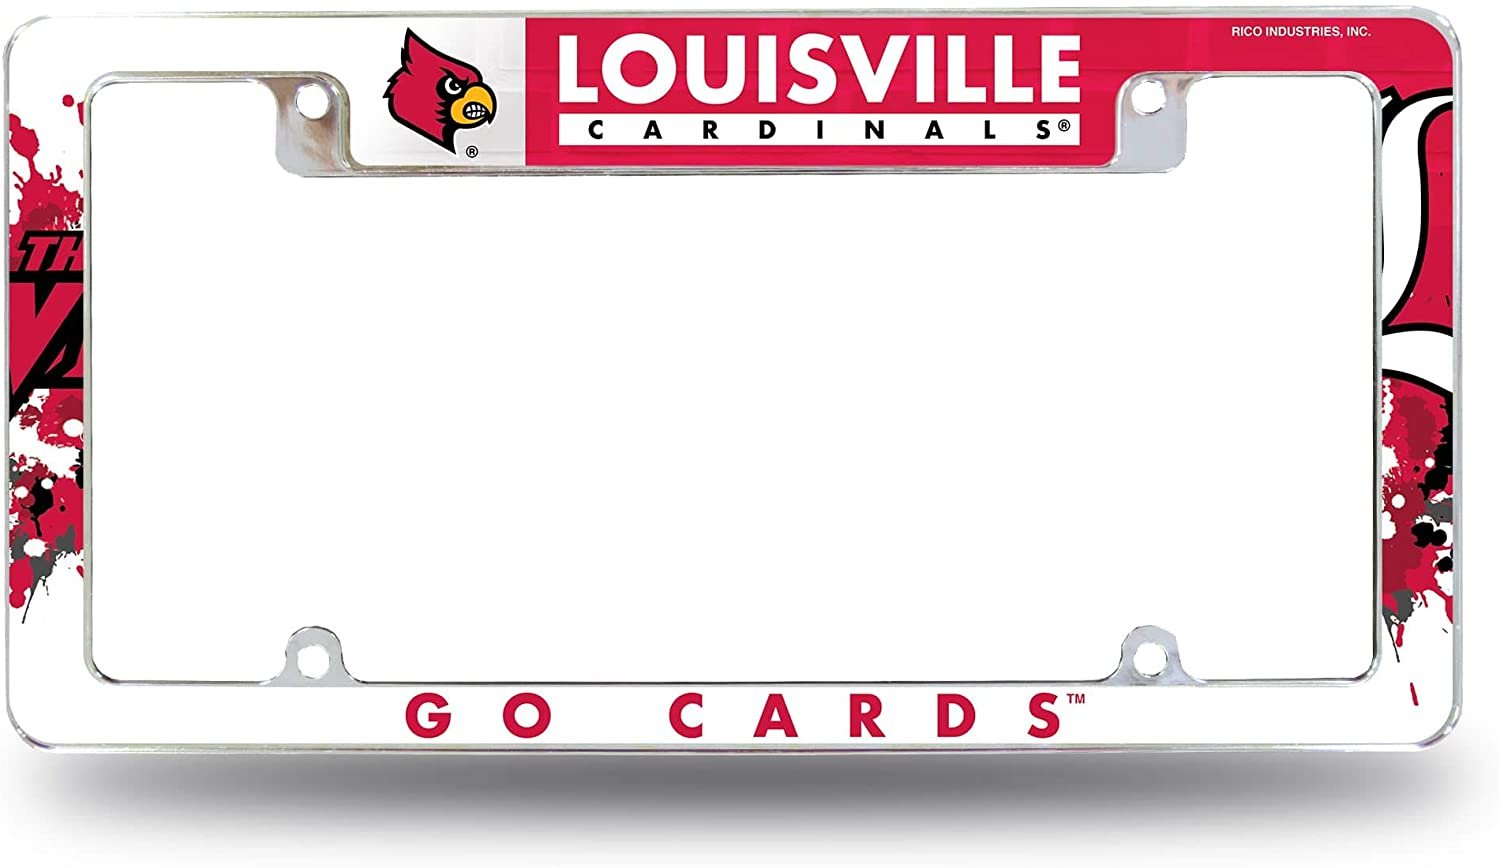 Louisville Cardinals Metal License Plate Frame Tag Cover All Over Design University of